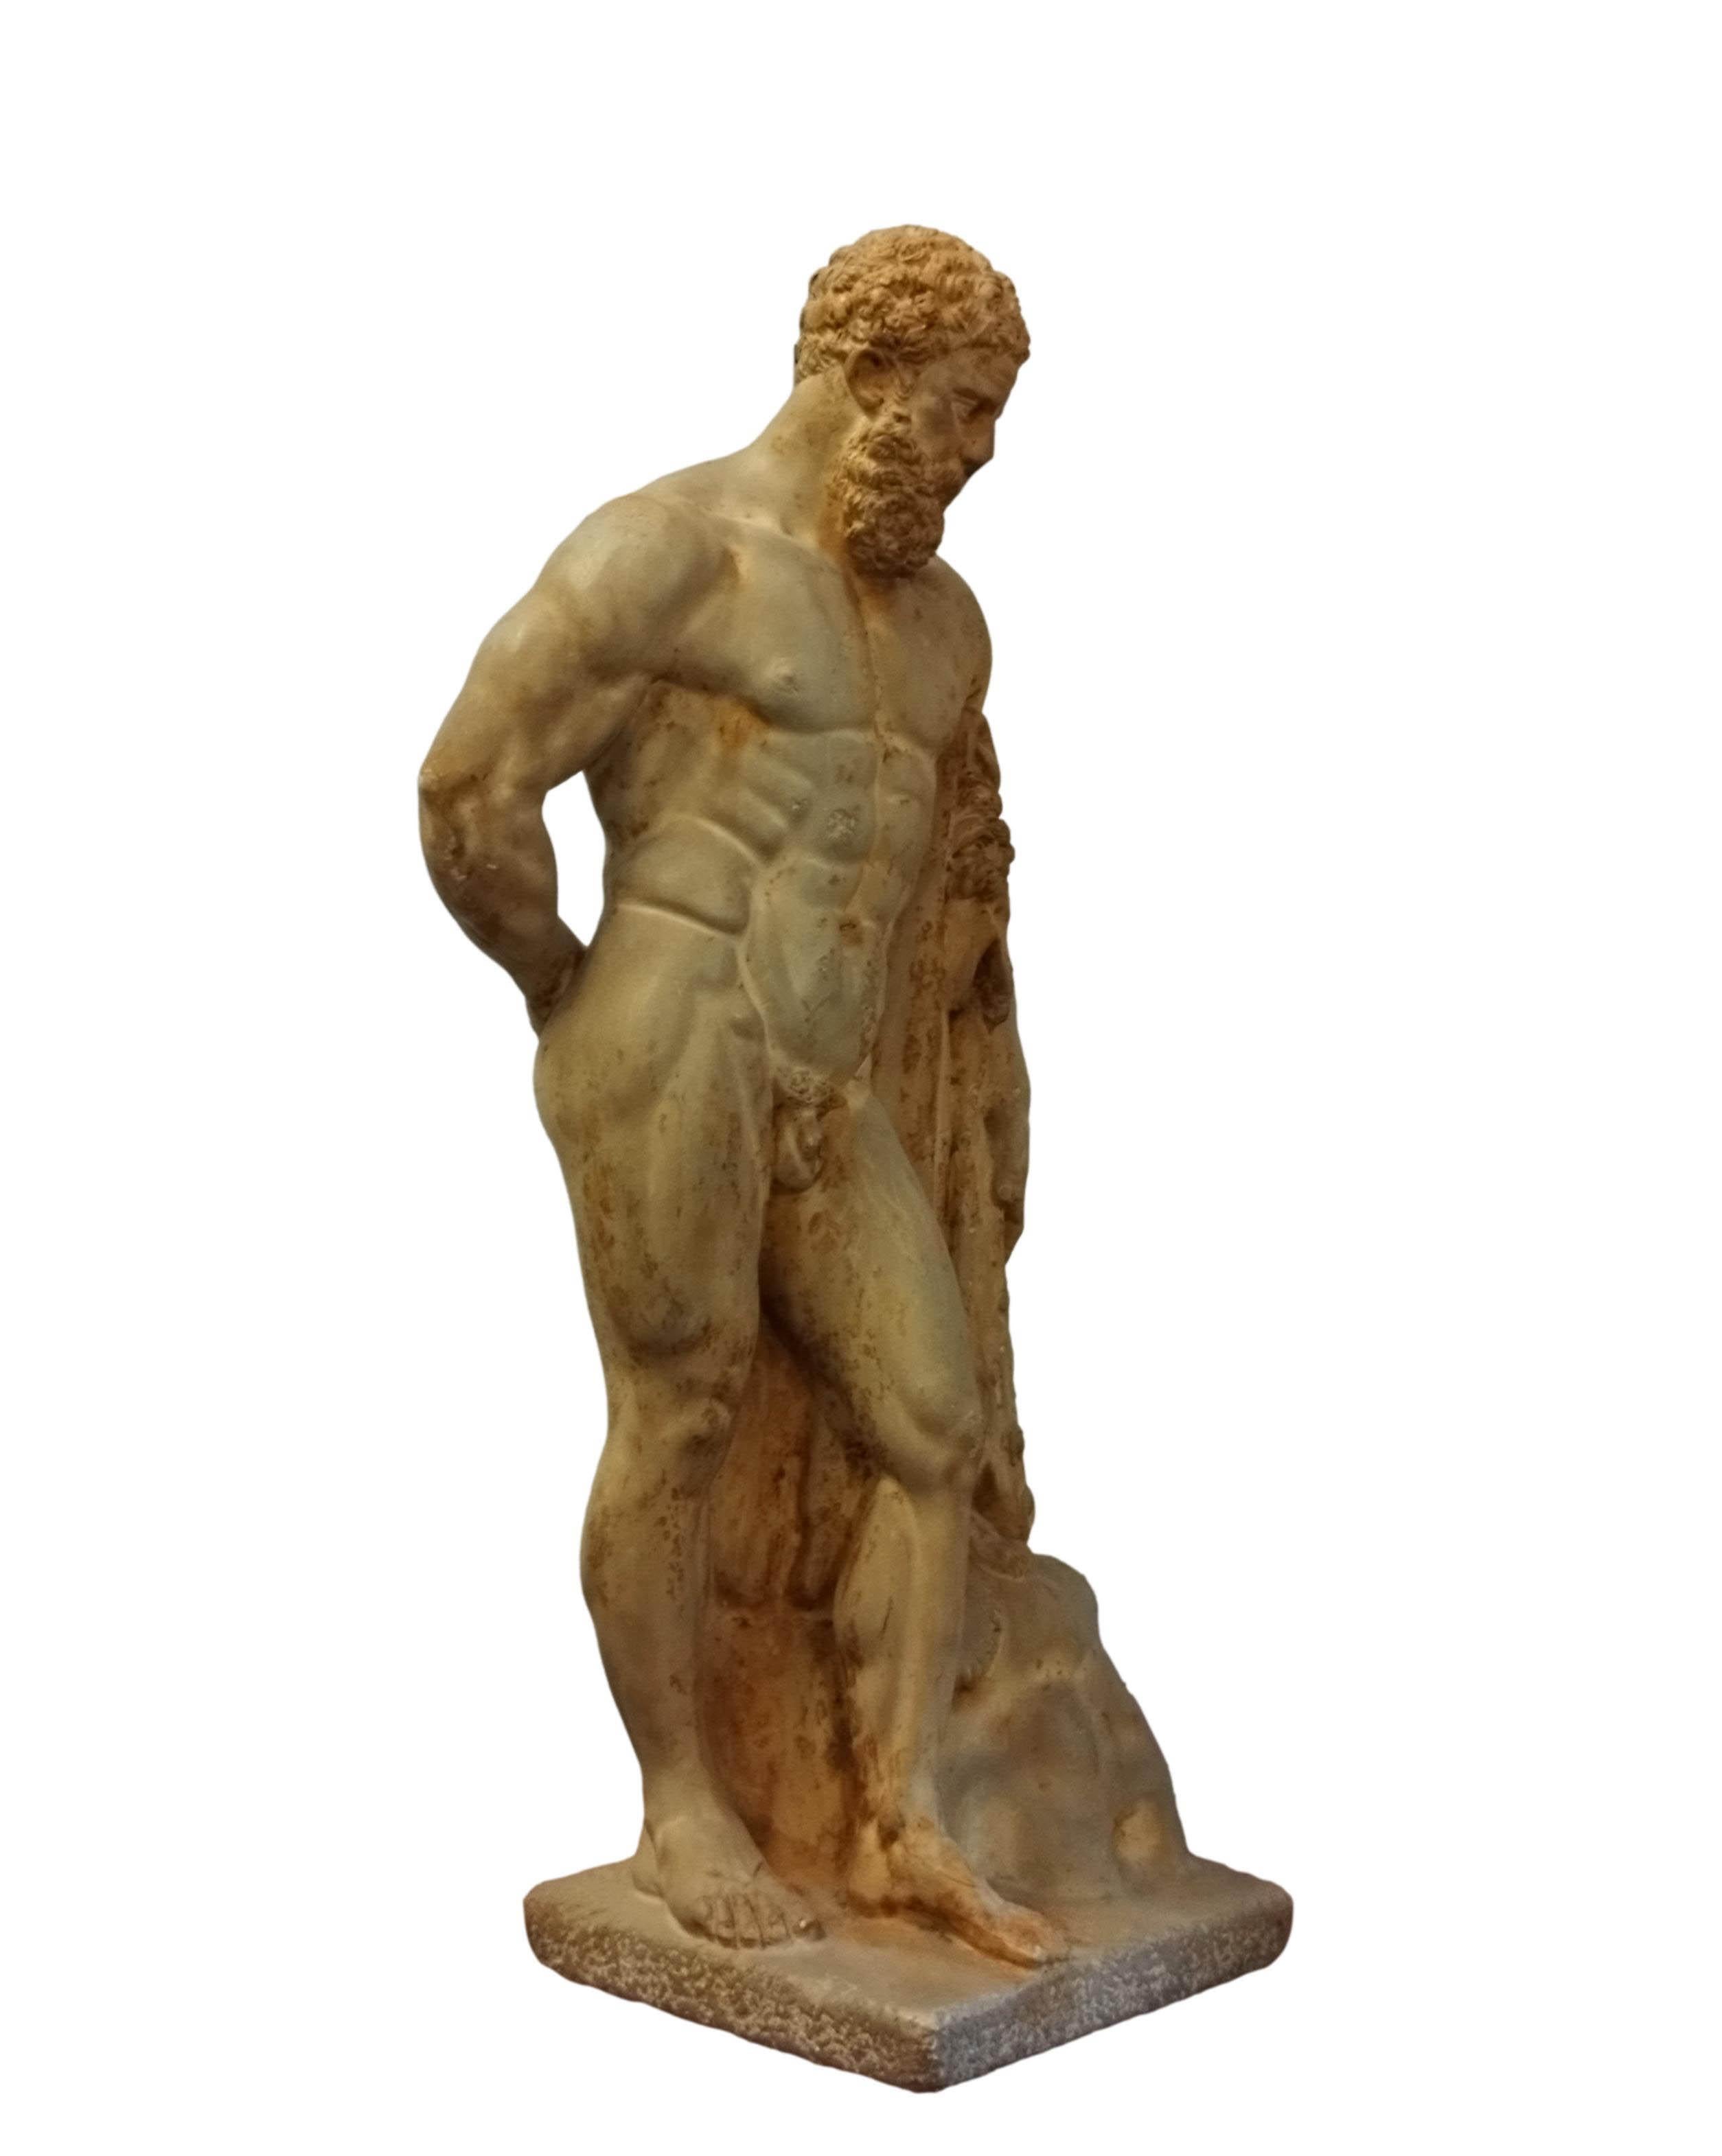 Classical Roman Resin Sculpture Male Hector Farnese

The Hercules Farnese is an enlarged copy made in the early 3rd century.
The enlarged copy was made for the Baths of Caracalla in Rome (dedicated in 216 A.D.), where the statue was recovered in